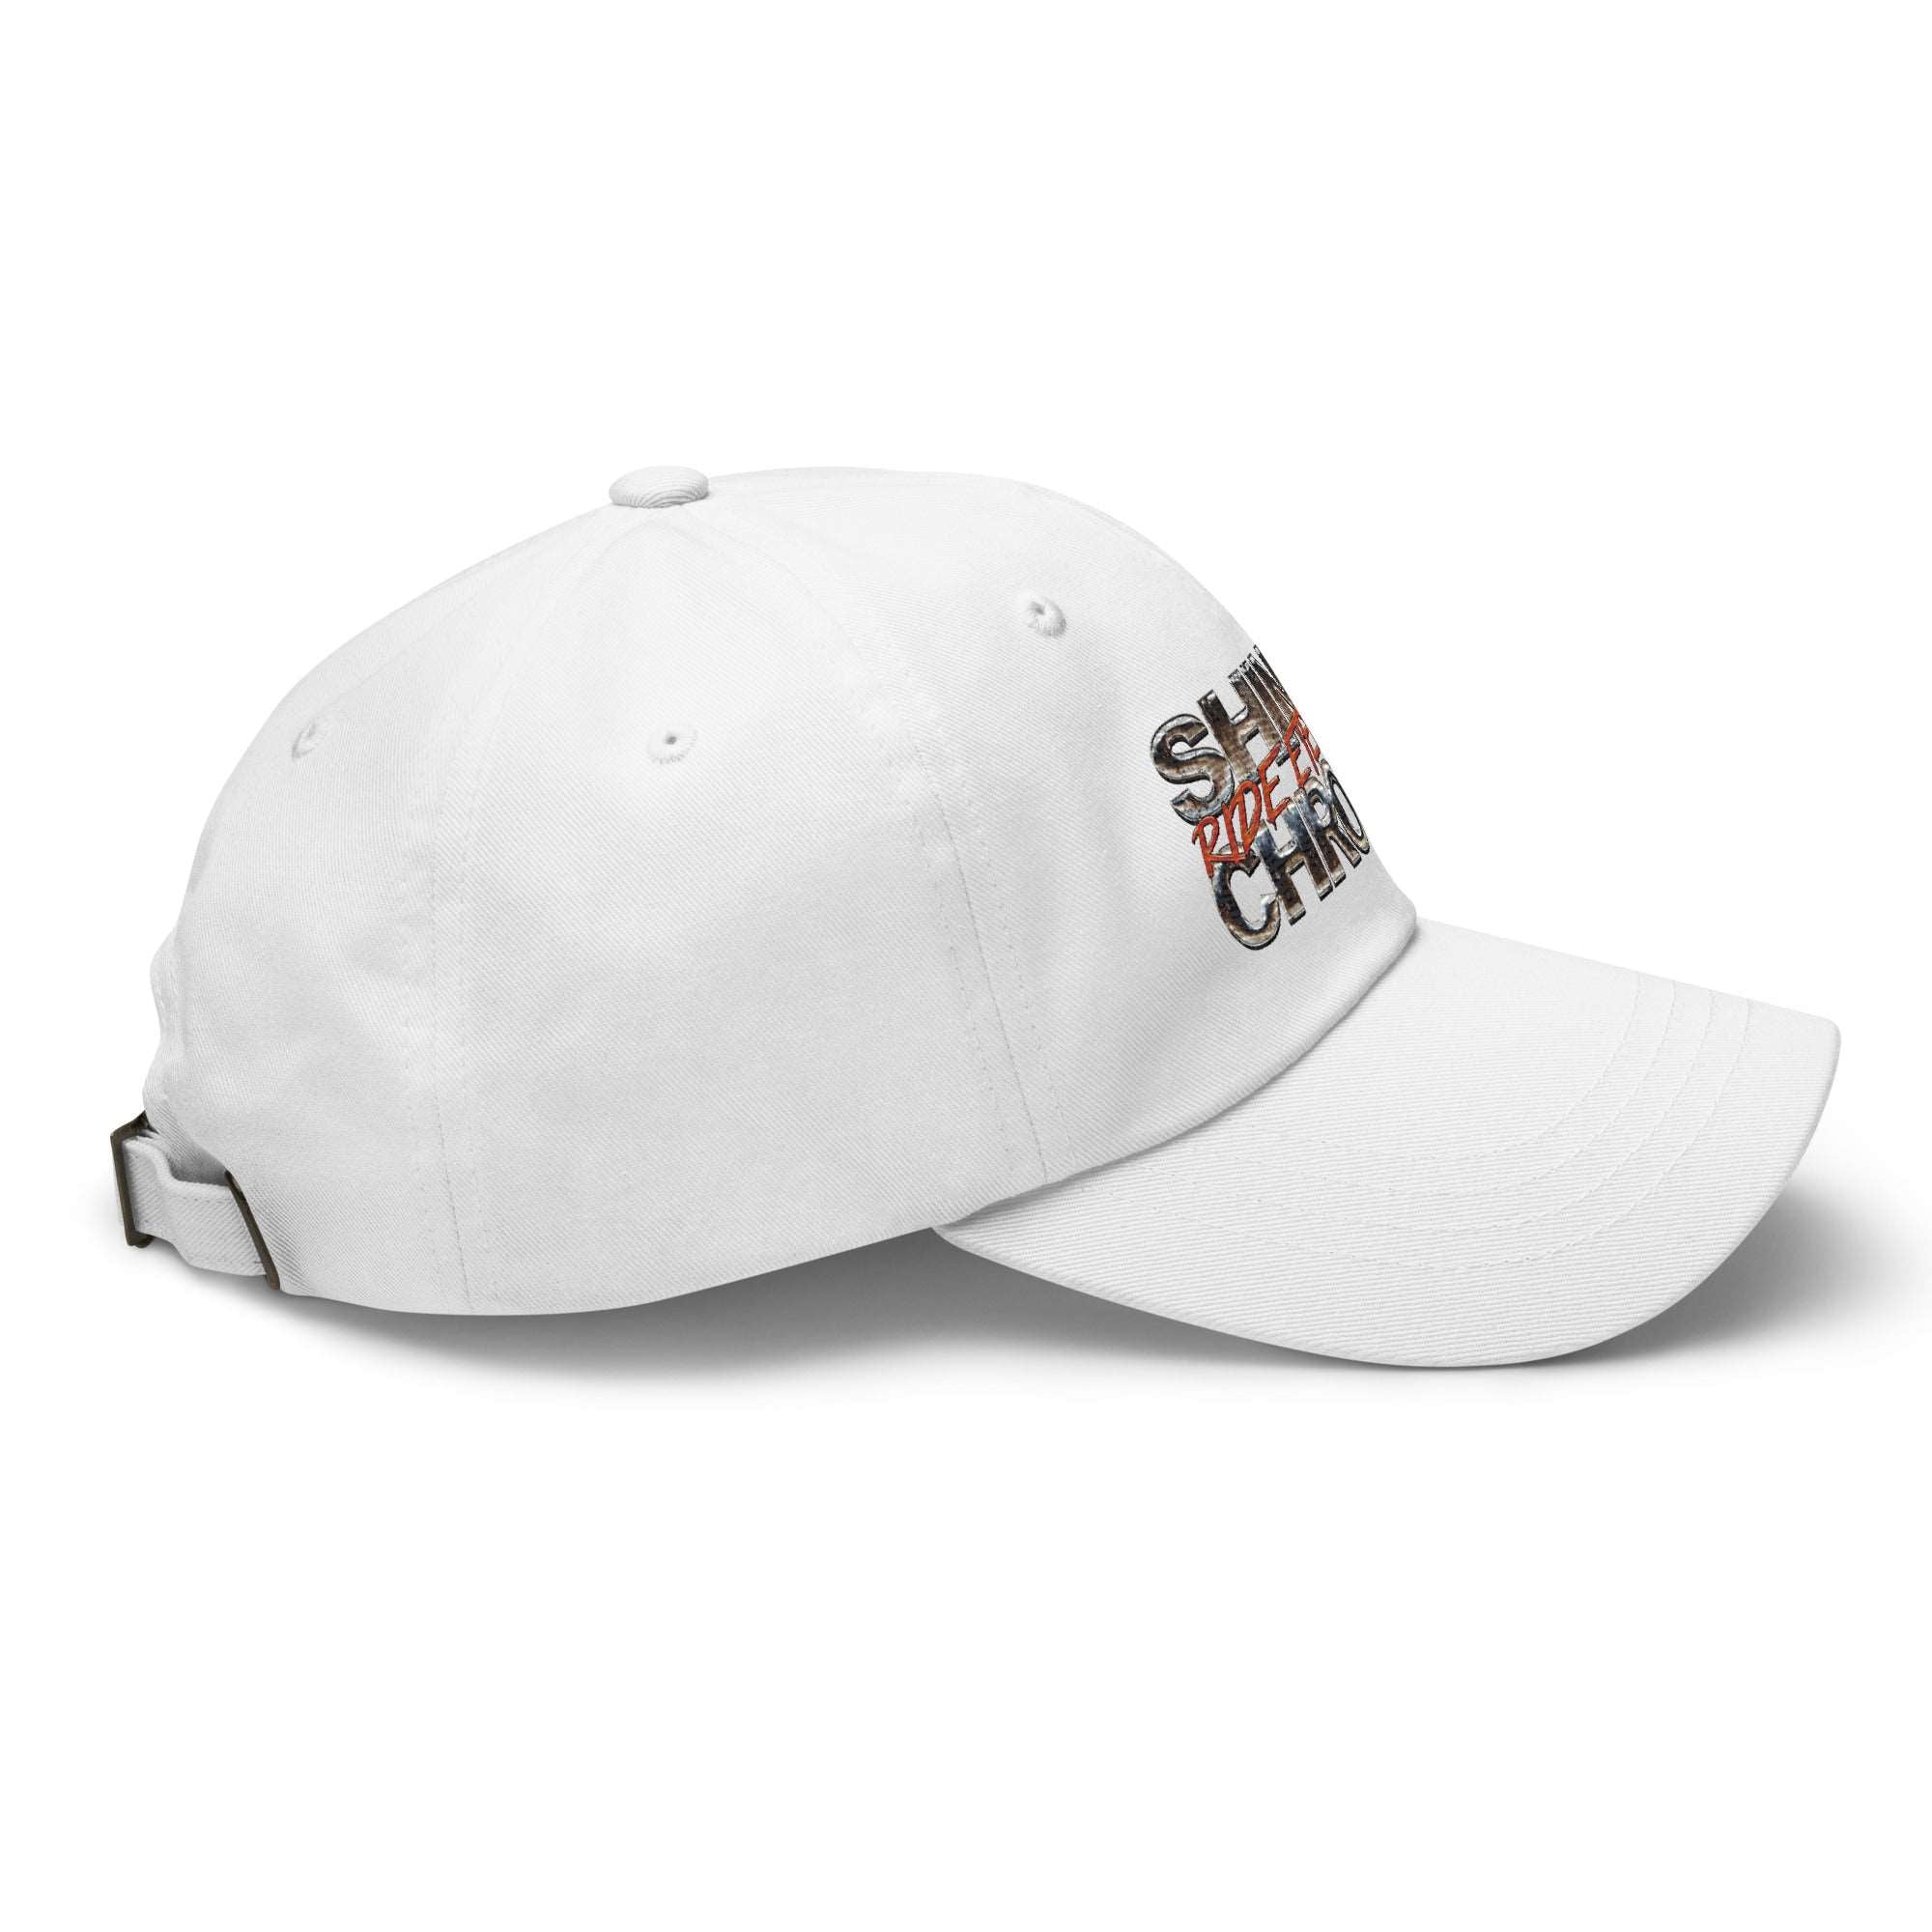 Shiny and Chrome Dad hat